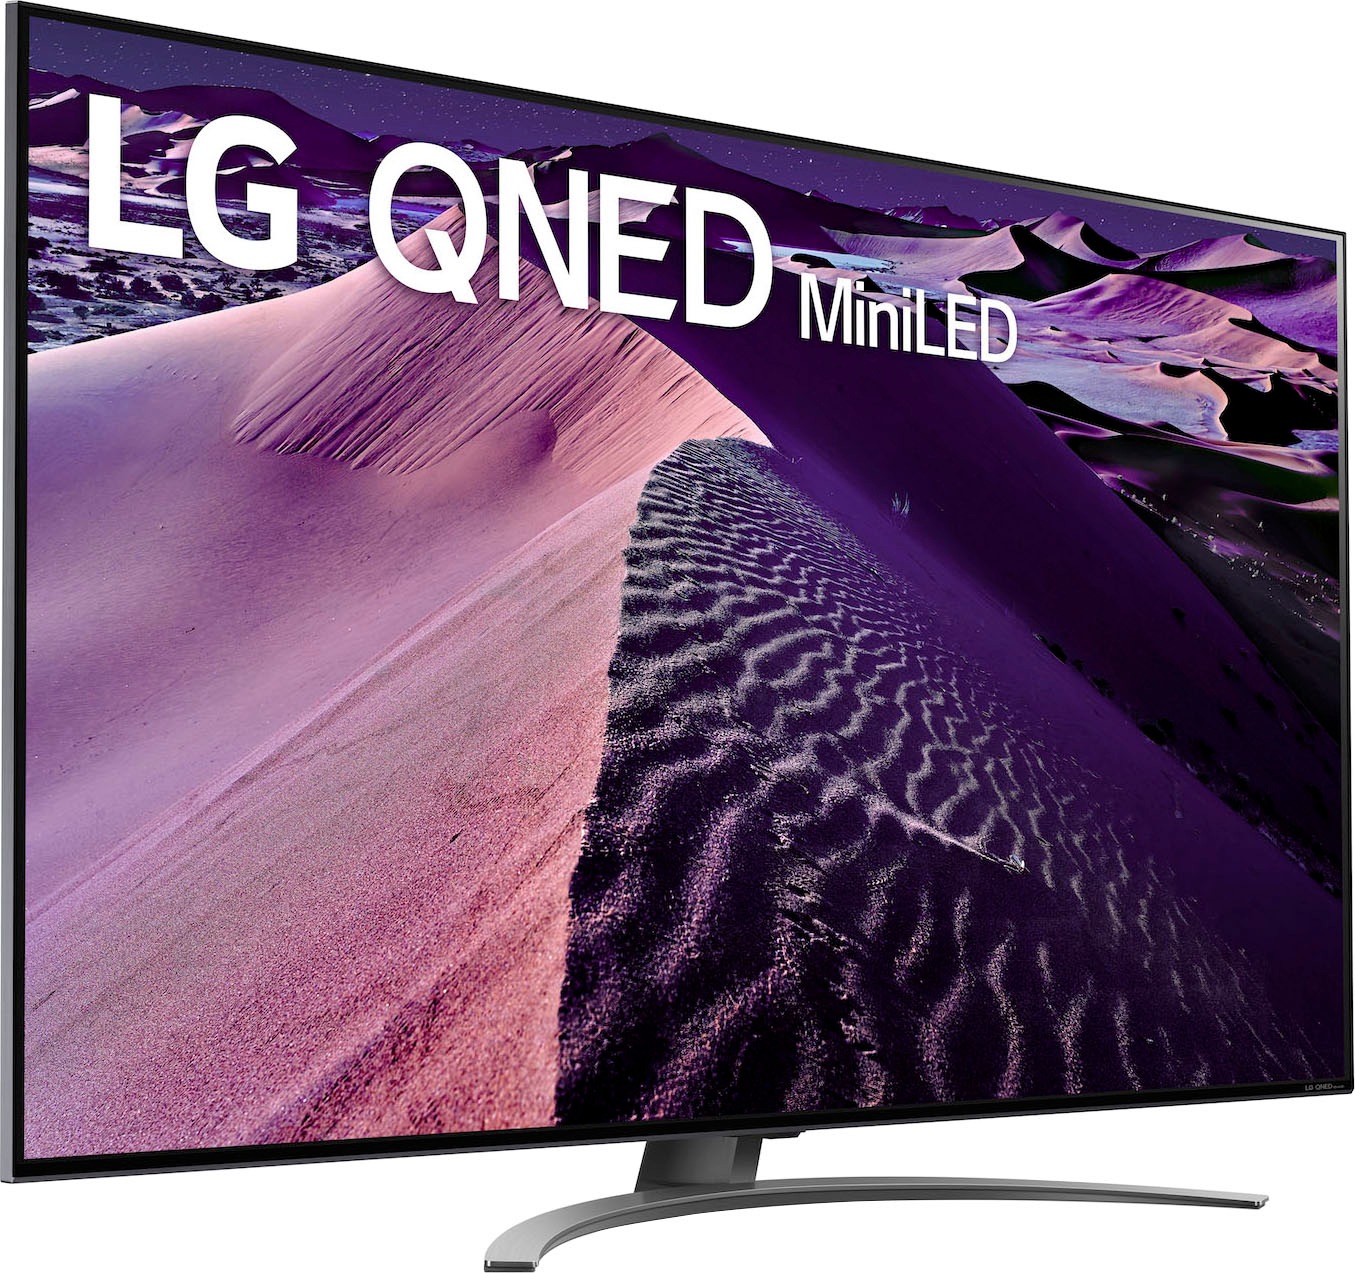 »55QNED869QA«, bei zu Gen5 Zoll, 120Hz,α7 jetzt Pro,HDMI Ultra kaufen Picture 4K QNED,bis AI-Prozessor,AI LG cm/55 HD, QNED-Fernseher Smart-TV, 4K 2.1 OTTO 139